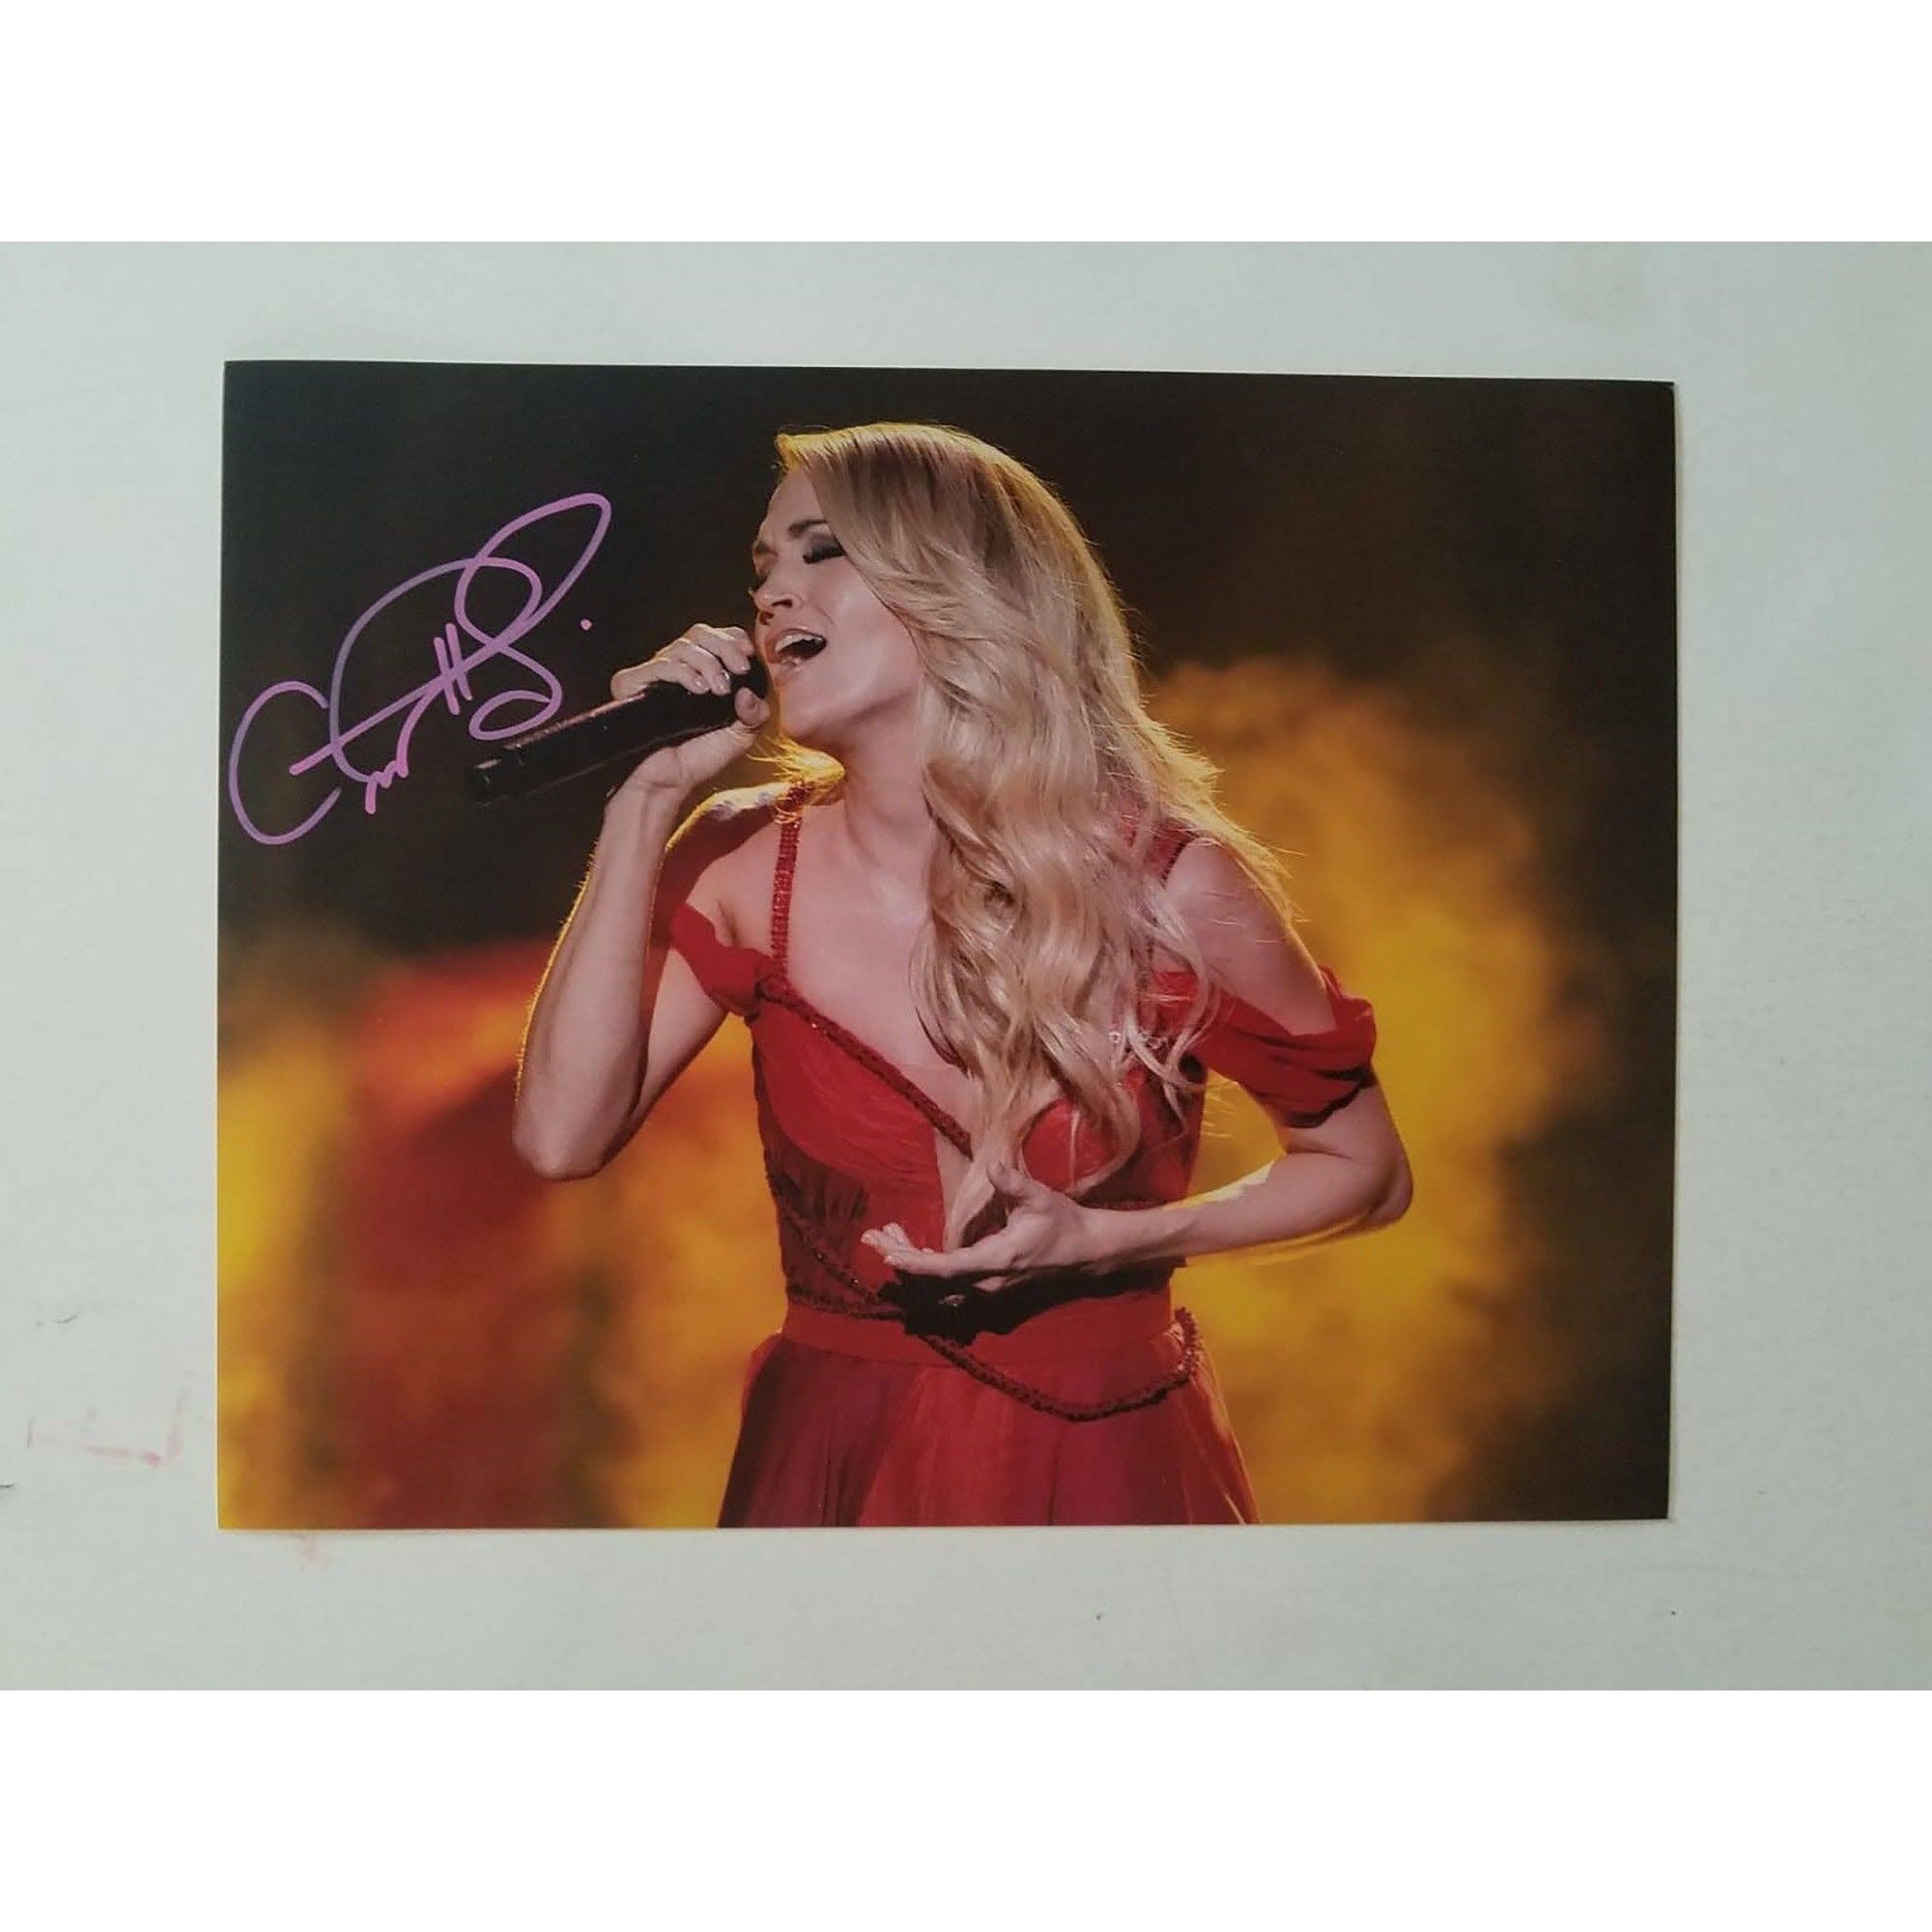 Carrie Underwood 8 x 10 signed photo